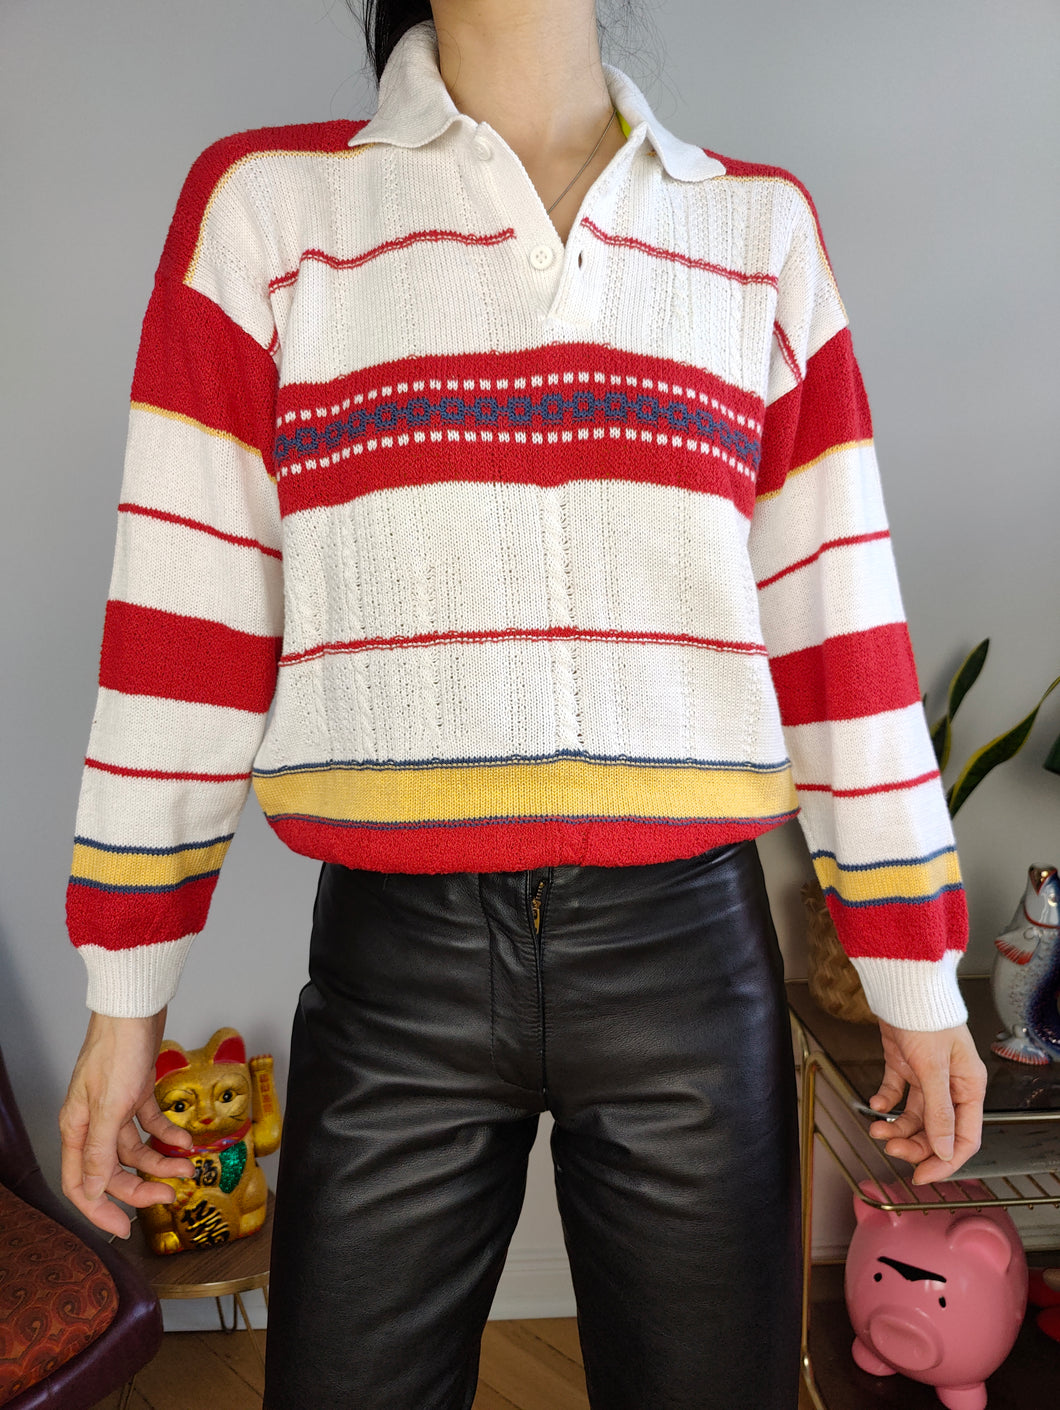 Vintage knit polo collar sweater knitted top pullover jumper white red stripes XS-S